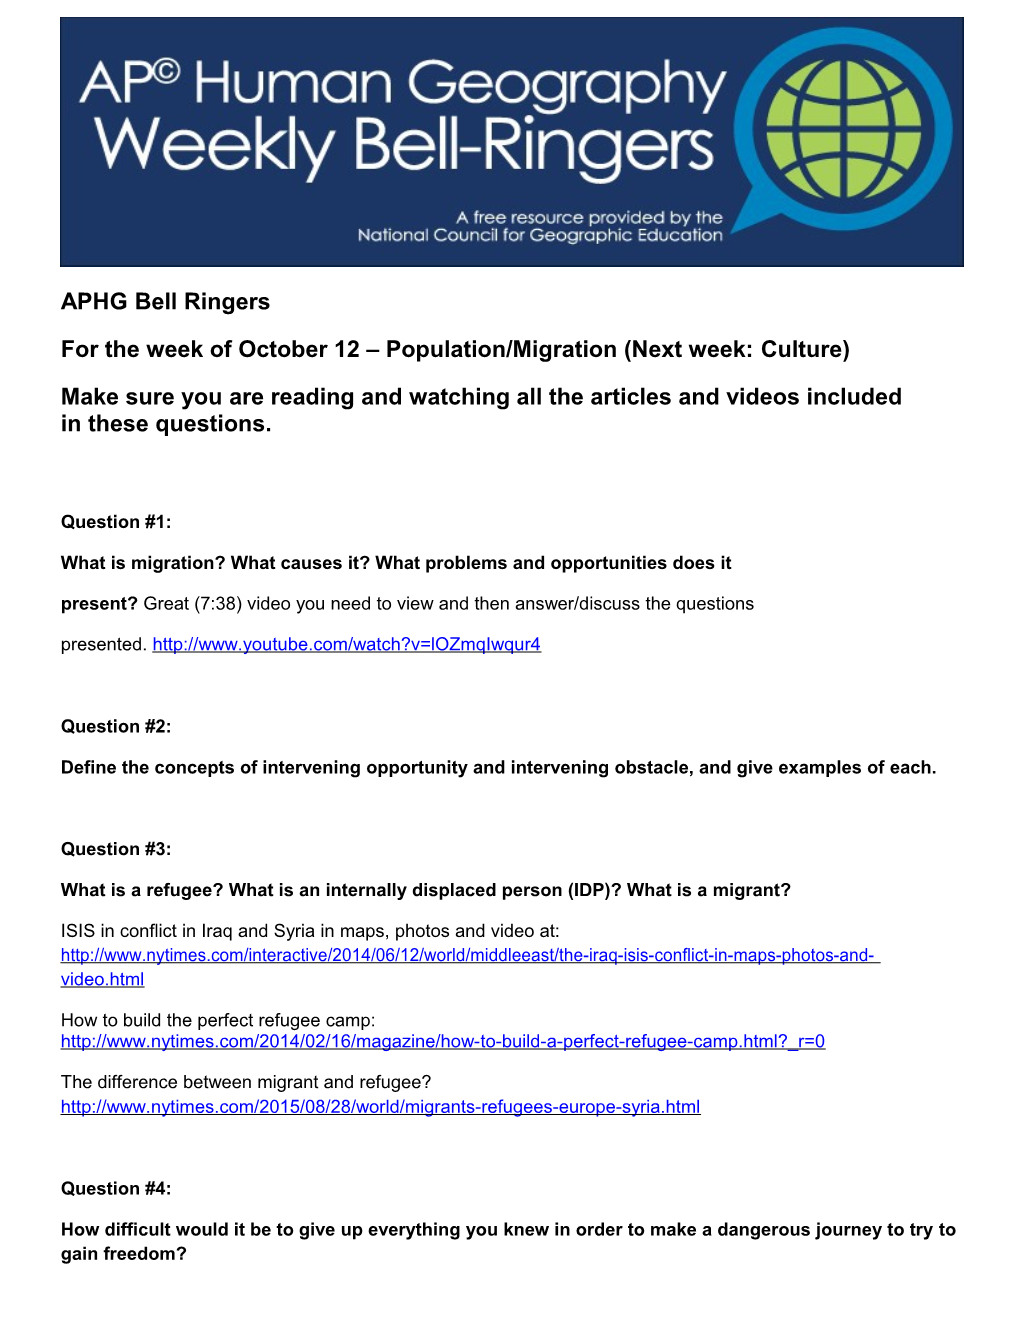 For the Week of October 12 Population/Migration (Next Week:Culture)